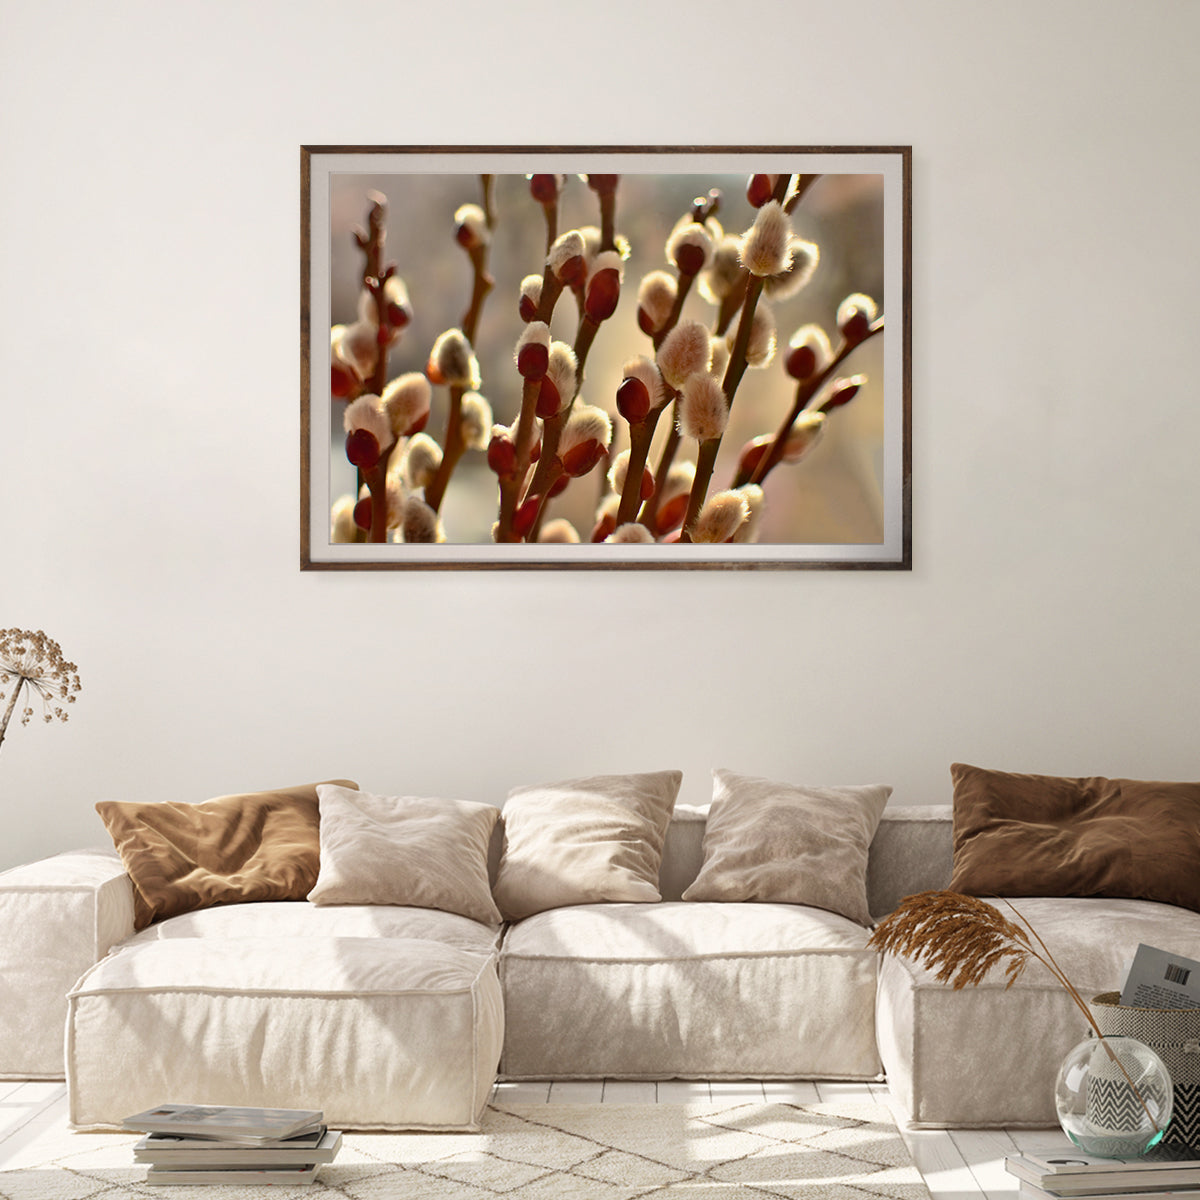 Willow Branches Posters Prints Wall Decor-Horizontal Posters NOT FRAMED-CetArt-10″x8″ inches-CetArt